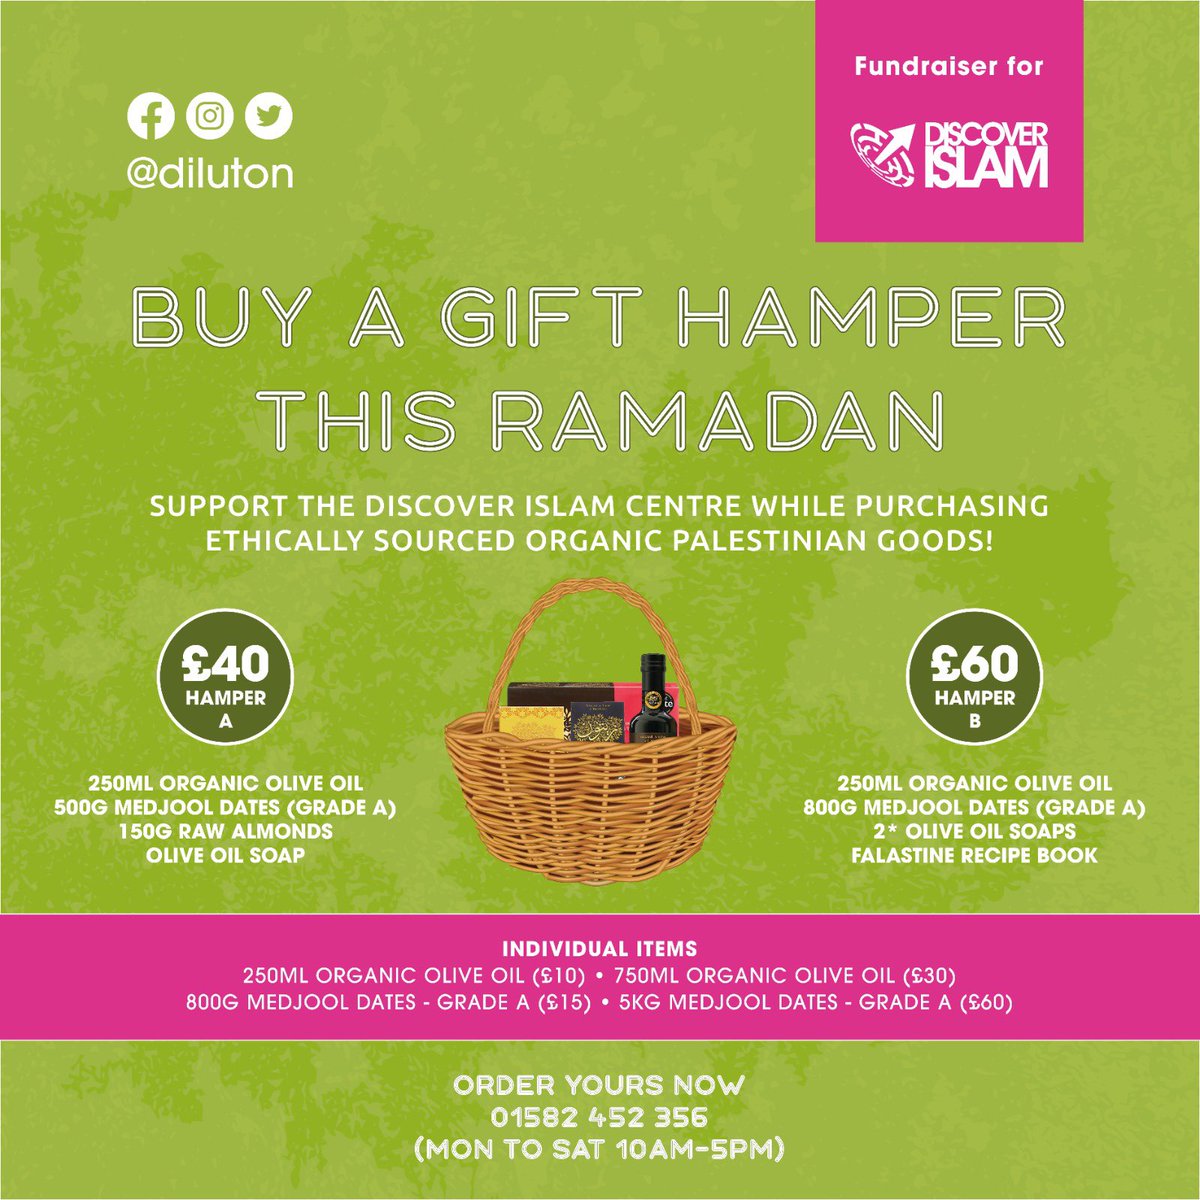 Support the Discover Islam Centre this Ramadan, while purchasing ethically sourced organic Palestinian goods! Our Centre is open Monday to Saturday (10am - 5pm). Whether it’s for family, friends or a treat for yourself, order yours today 😊. ☎️ 01582 452 356